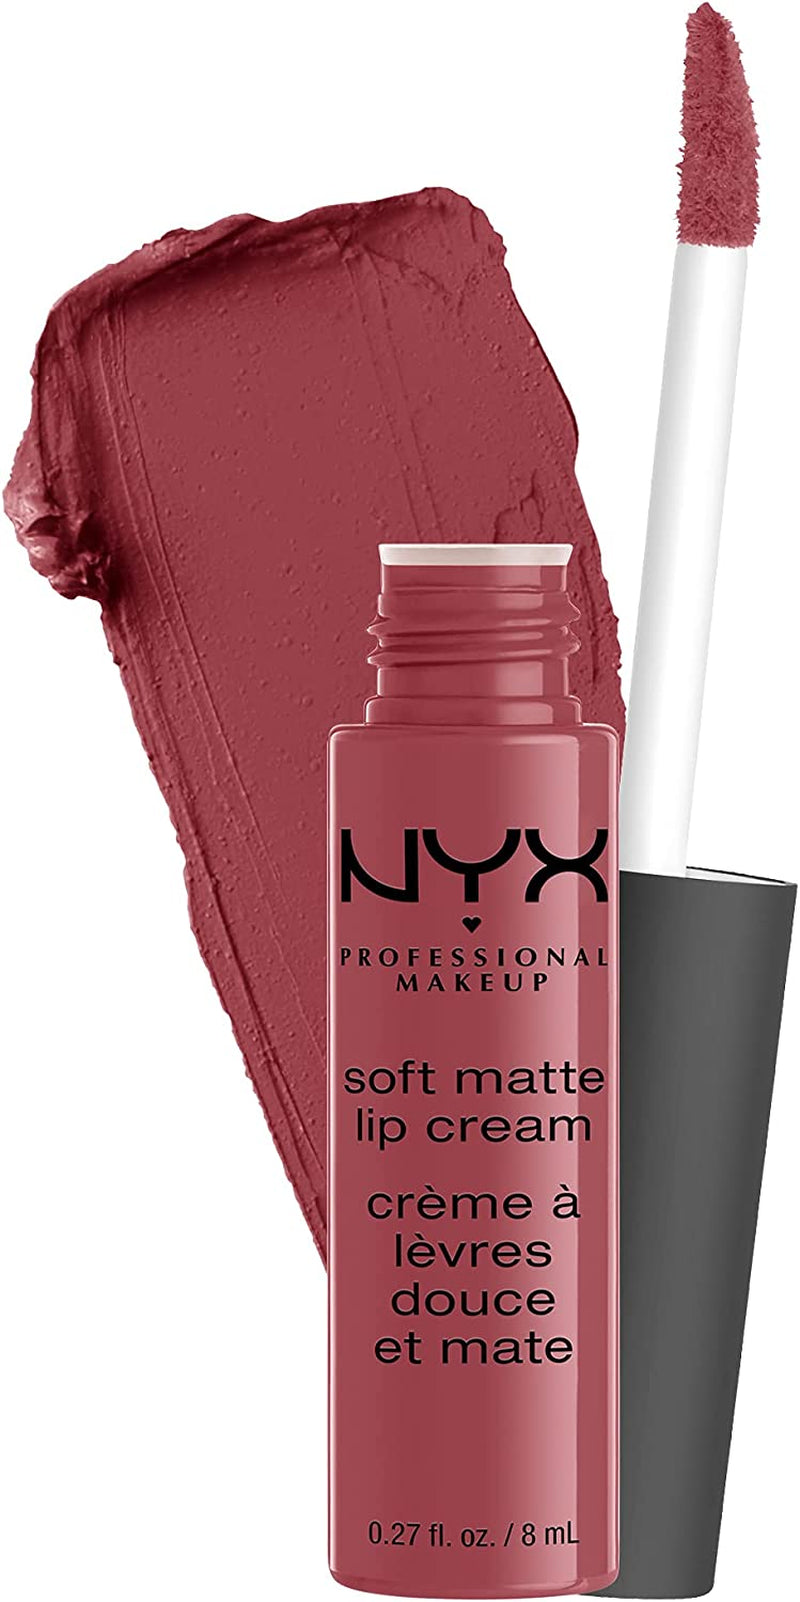 NYX Professional Makeup Soft Matte Lip Cream, Creamy and Matte Finish, Highly Pigmented Colour, Long Lasting, Vegan Formula, Shade: Budapest